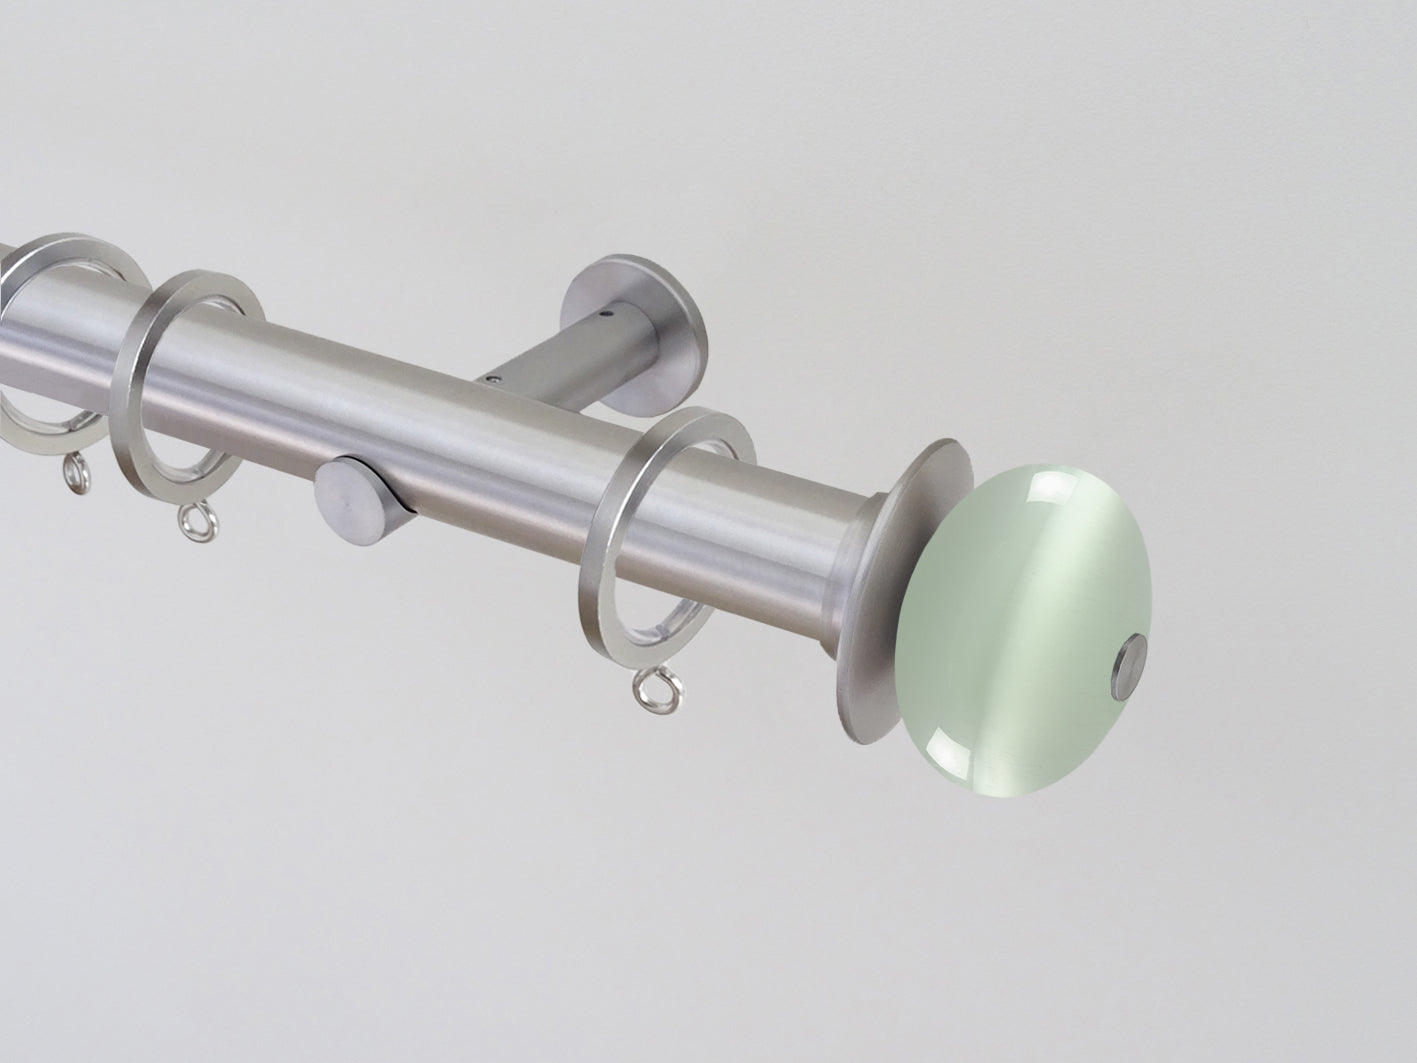 30mm diameter stainless steel curtain pole collection with coloured glass moonstone finials